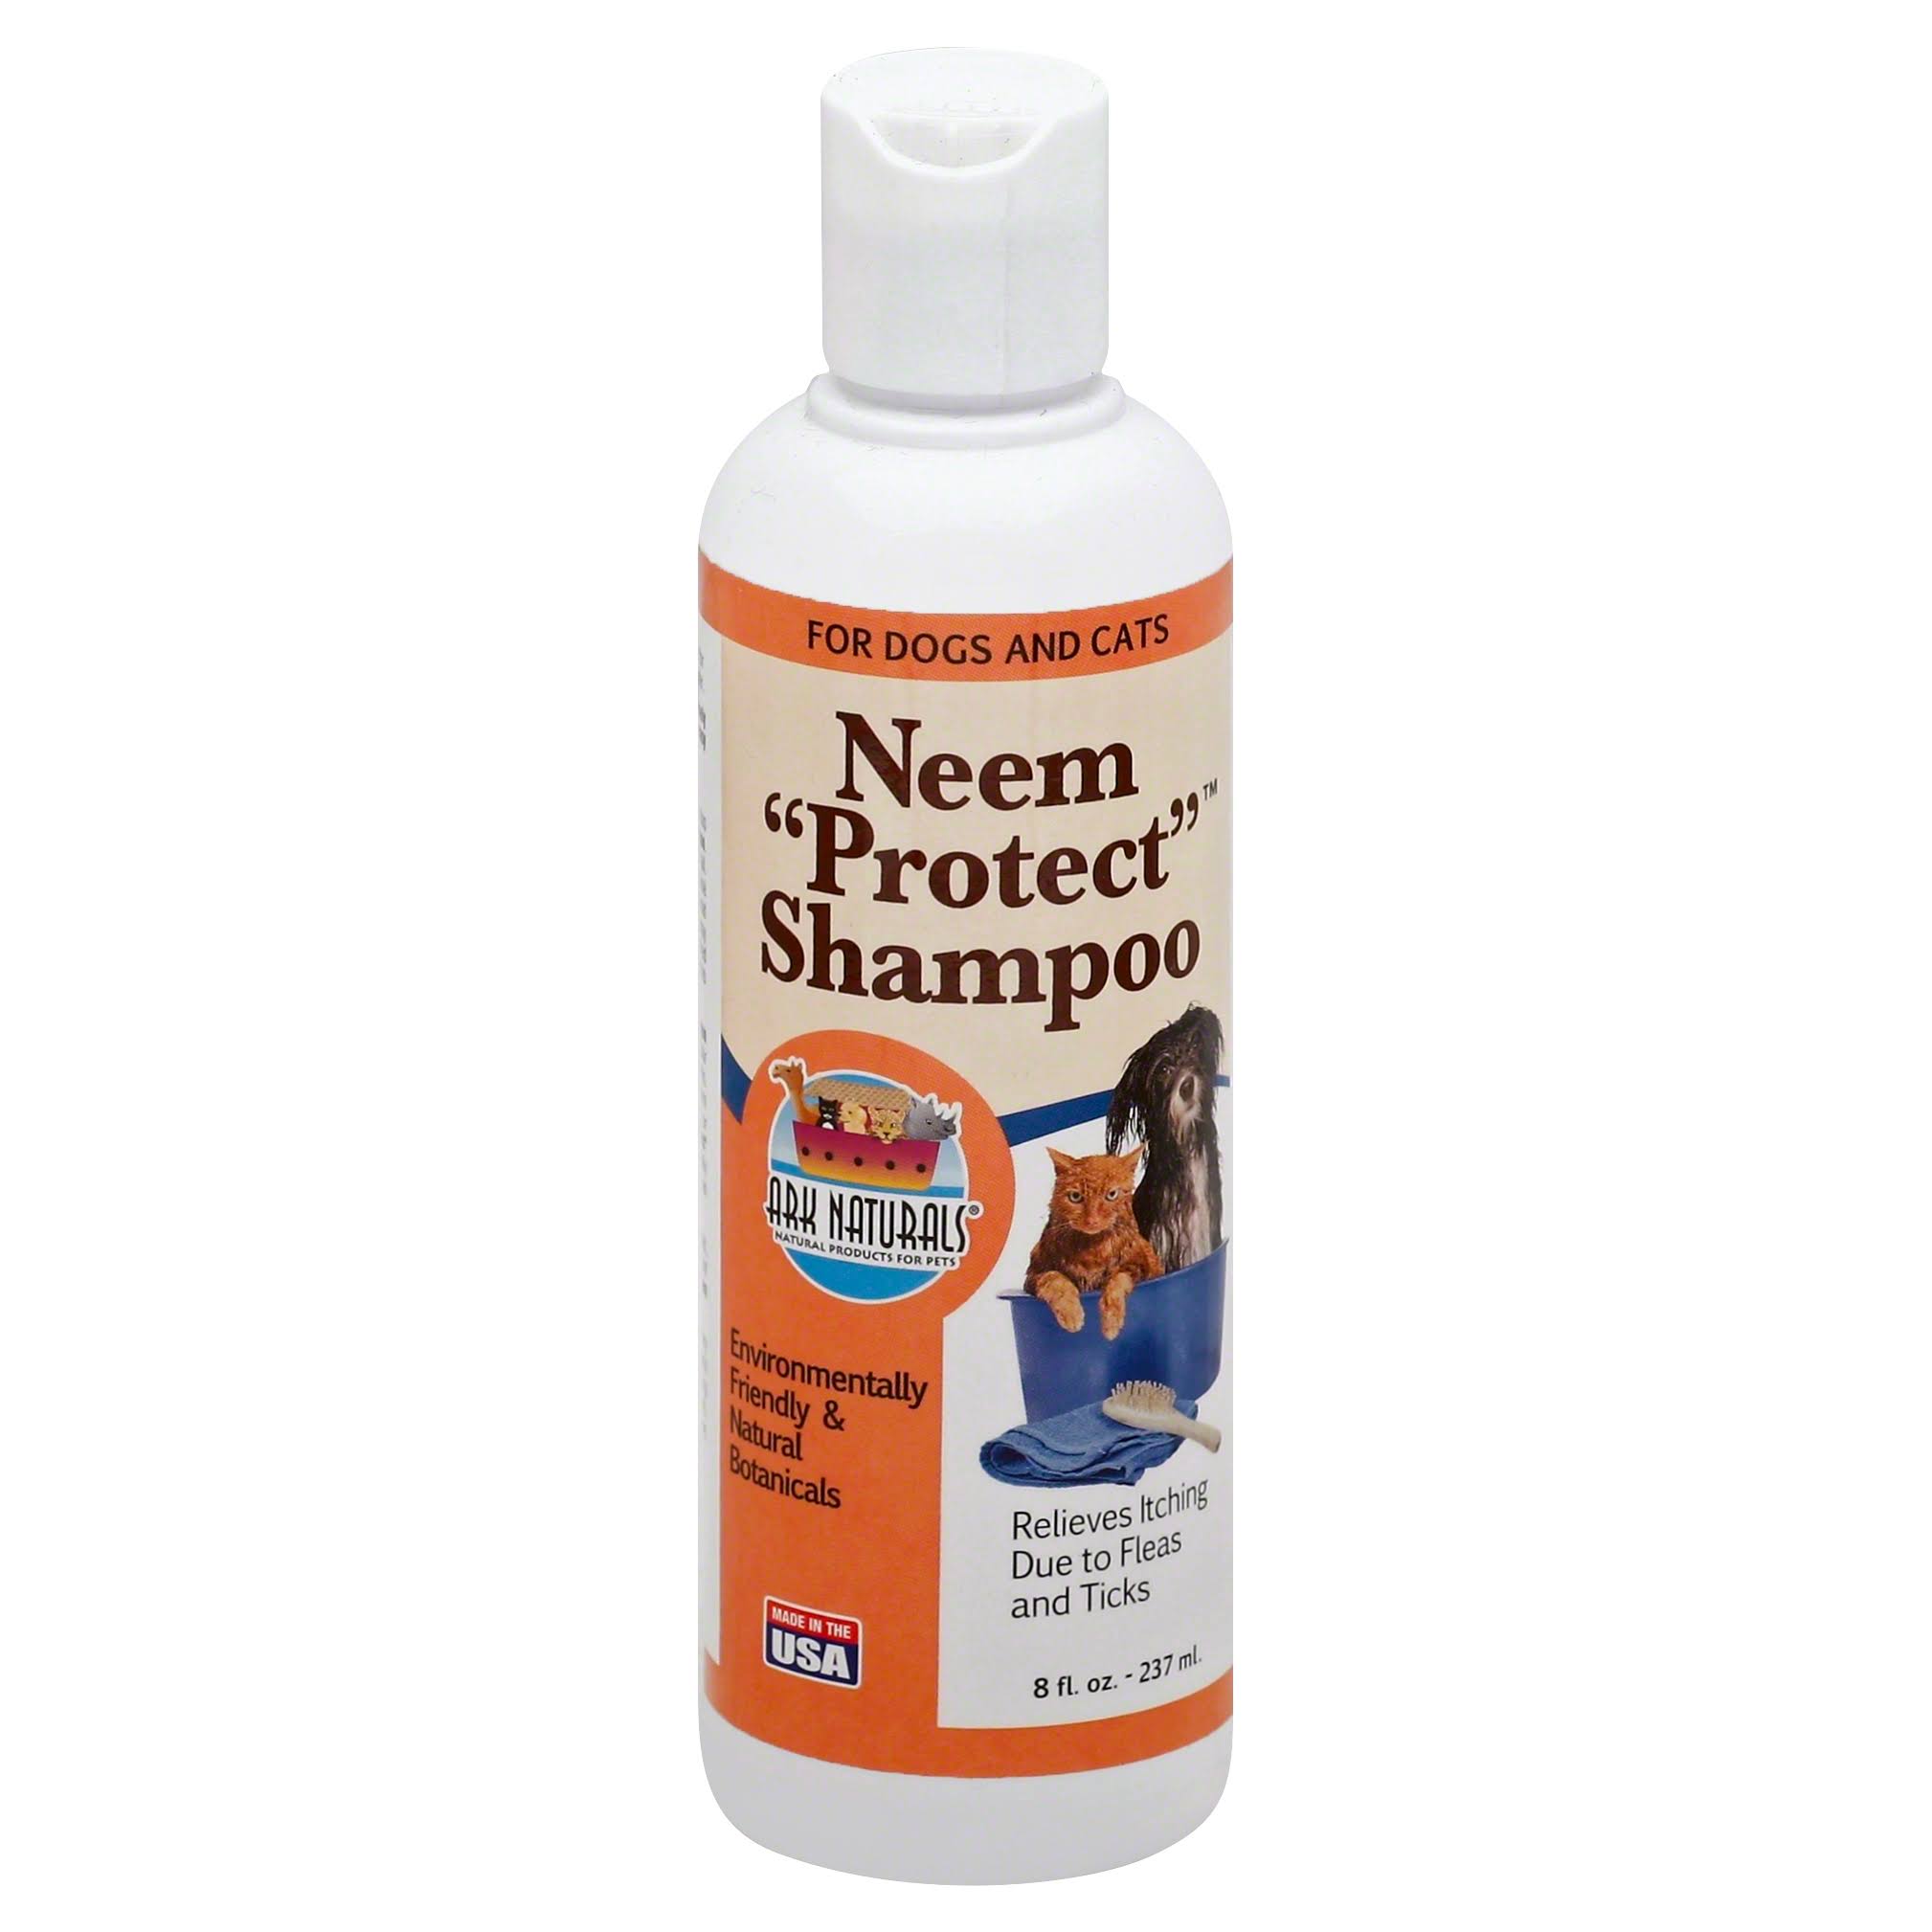 Ark Naturals Shampoo, Neem Protect, for Dogs and Cats - 8 fl oz